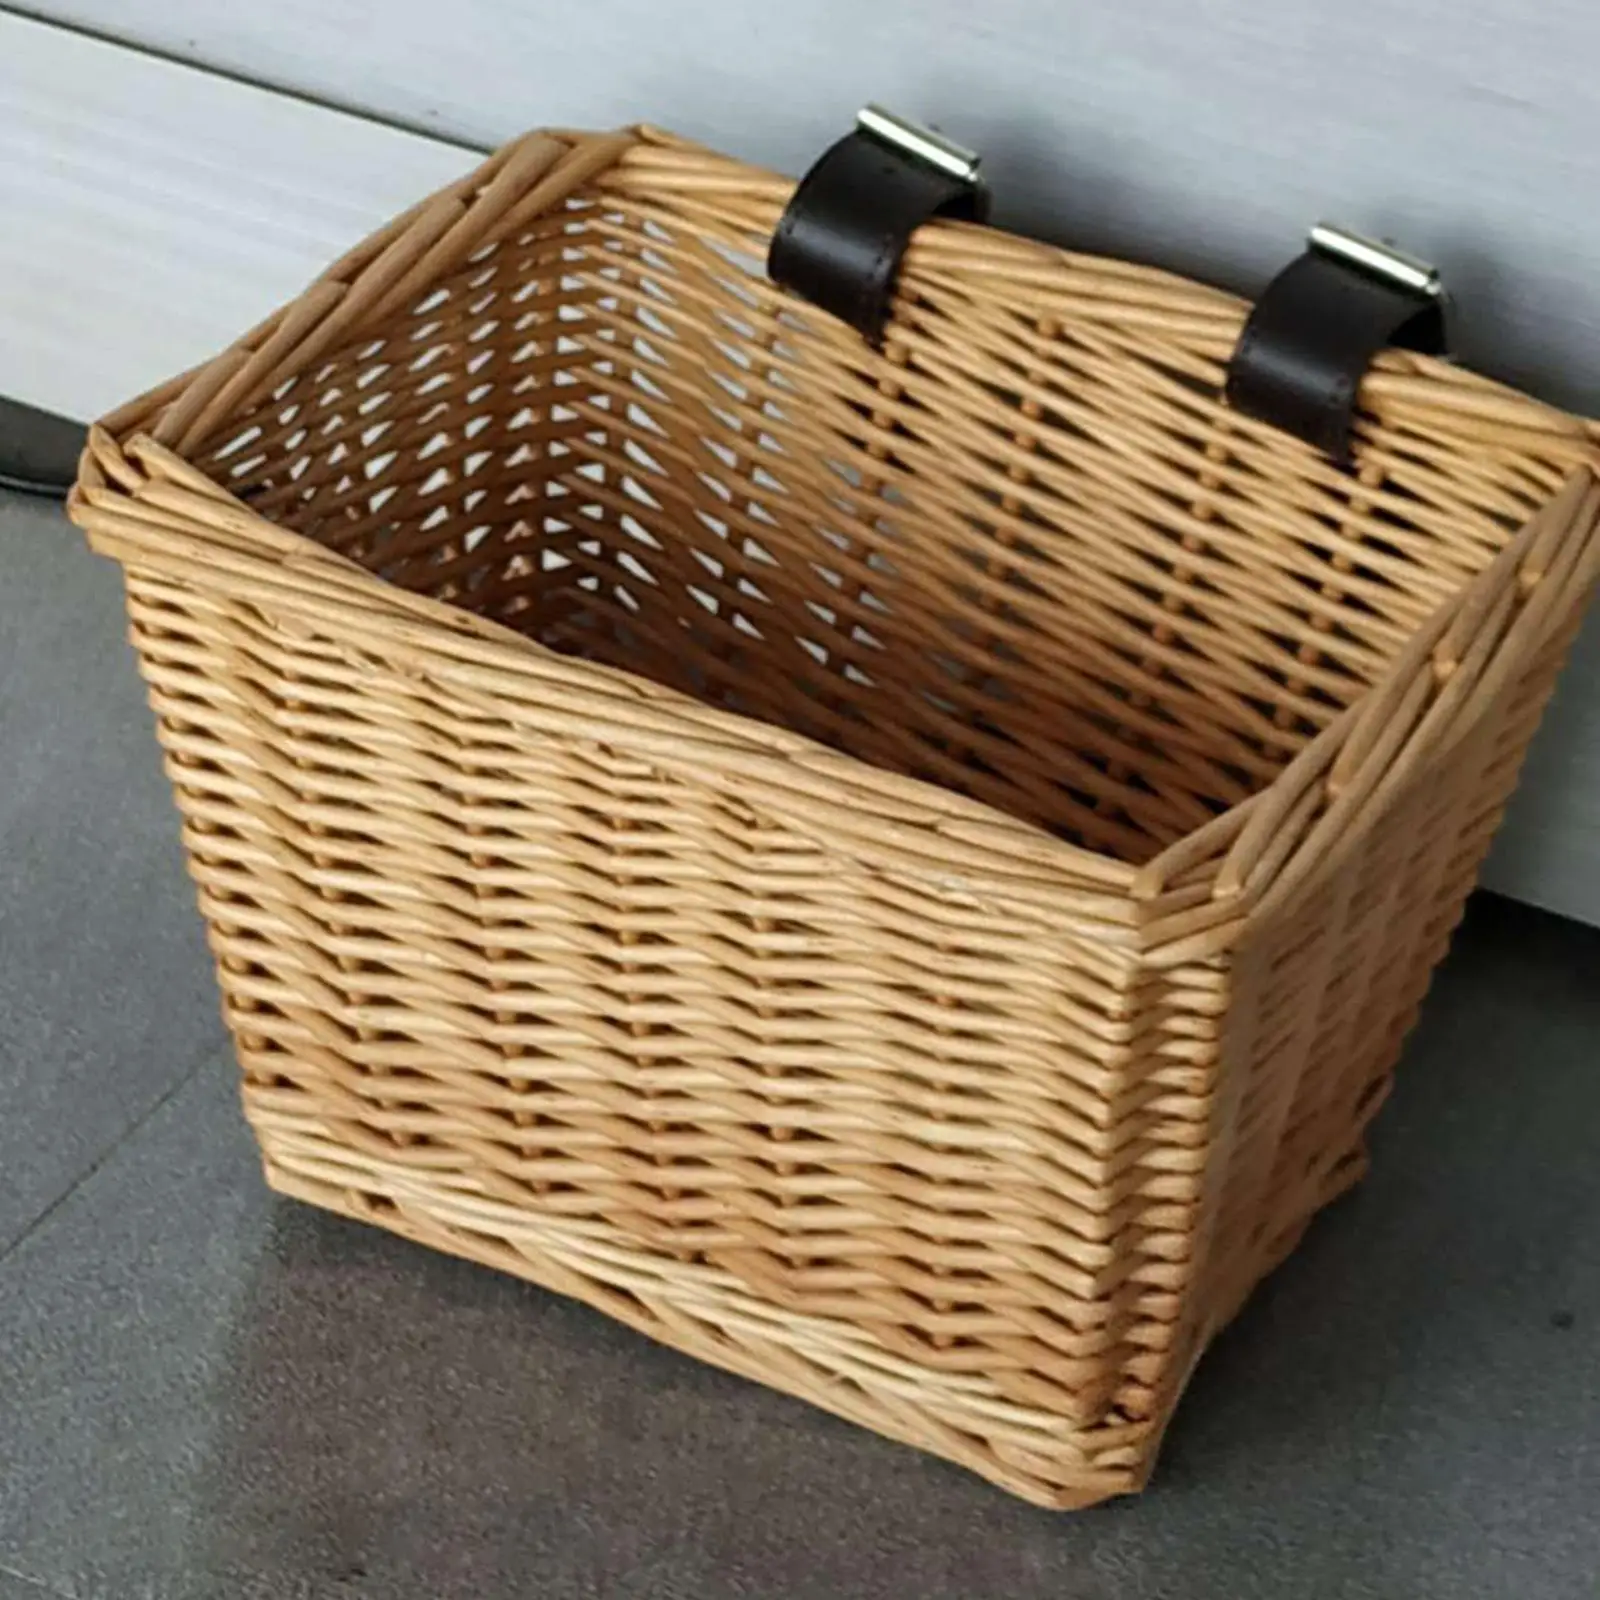 Wicker Bikes Basket Pet Carrier Bicycle Front Cats Dog Seat Organizer with